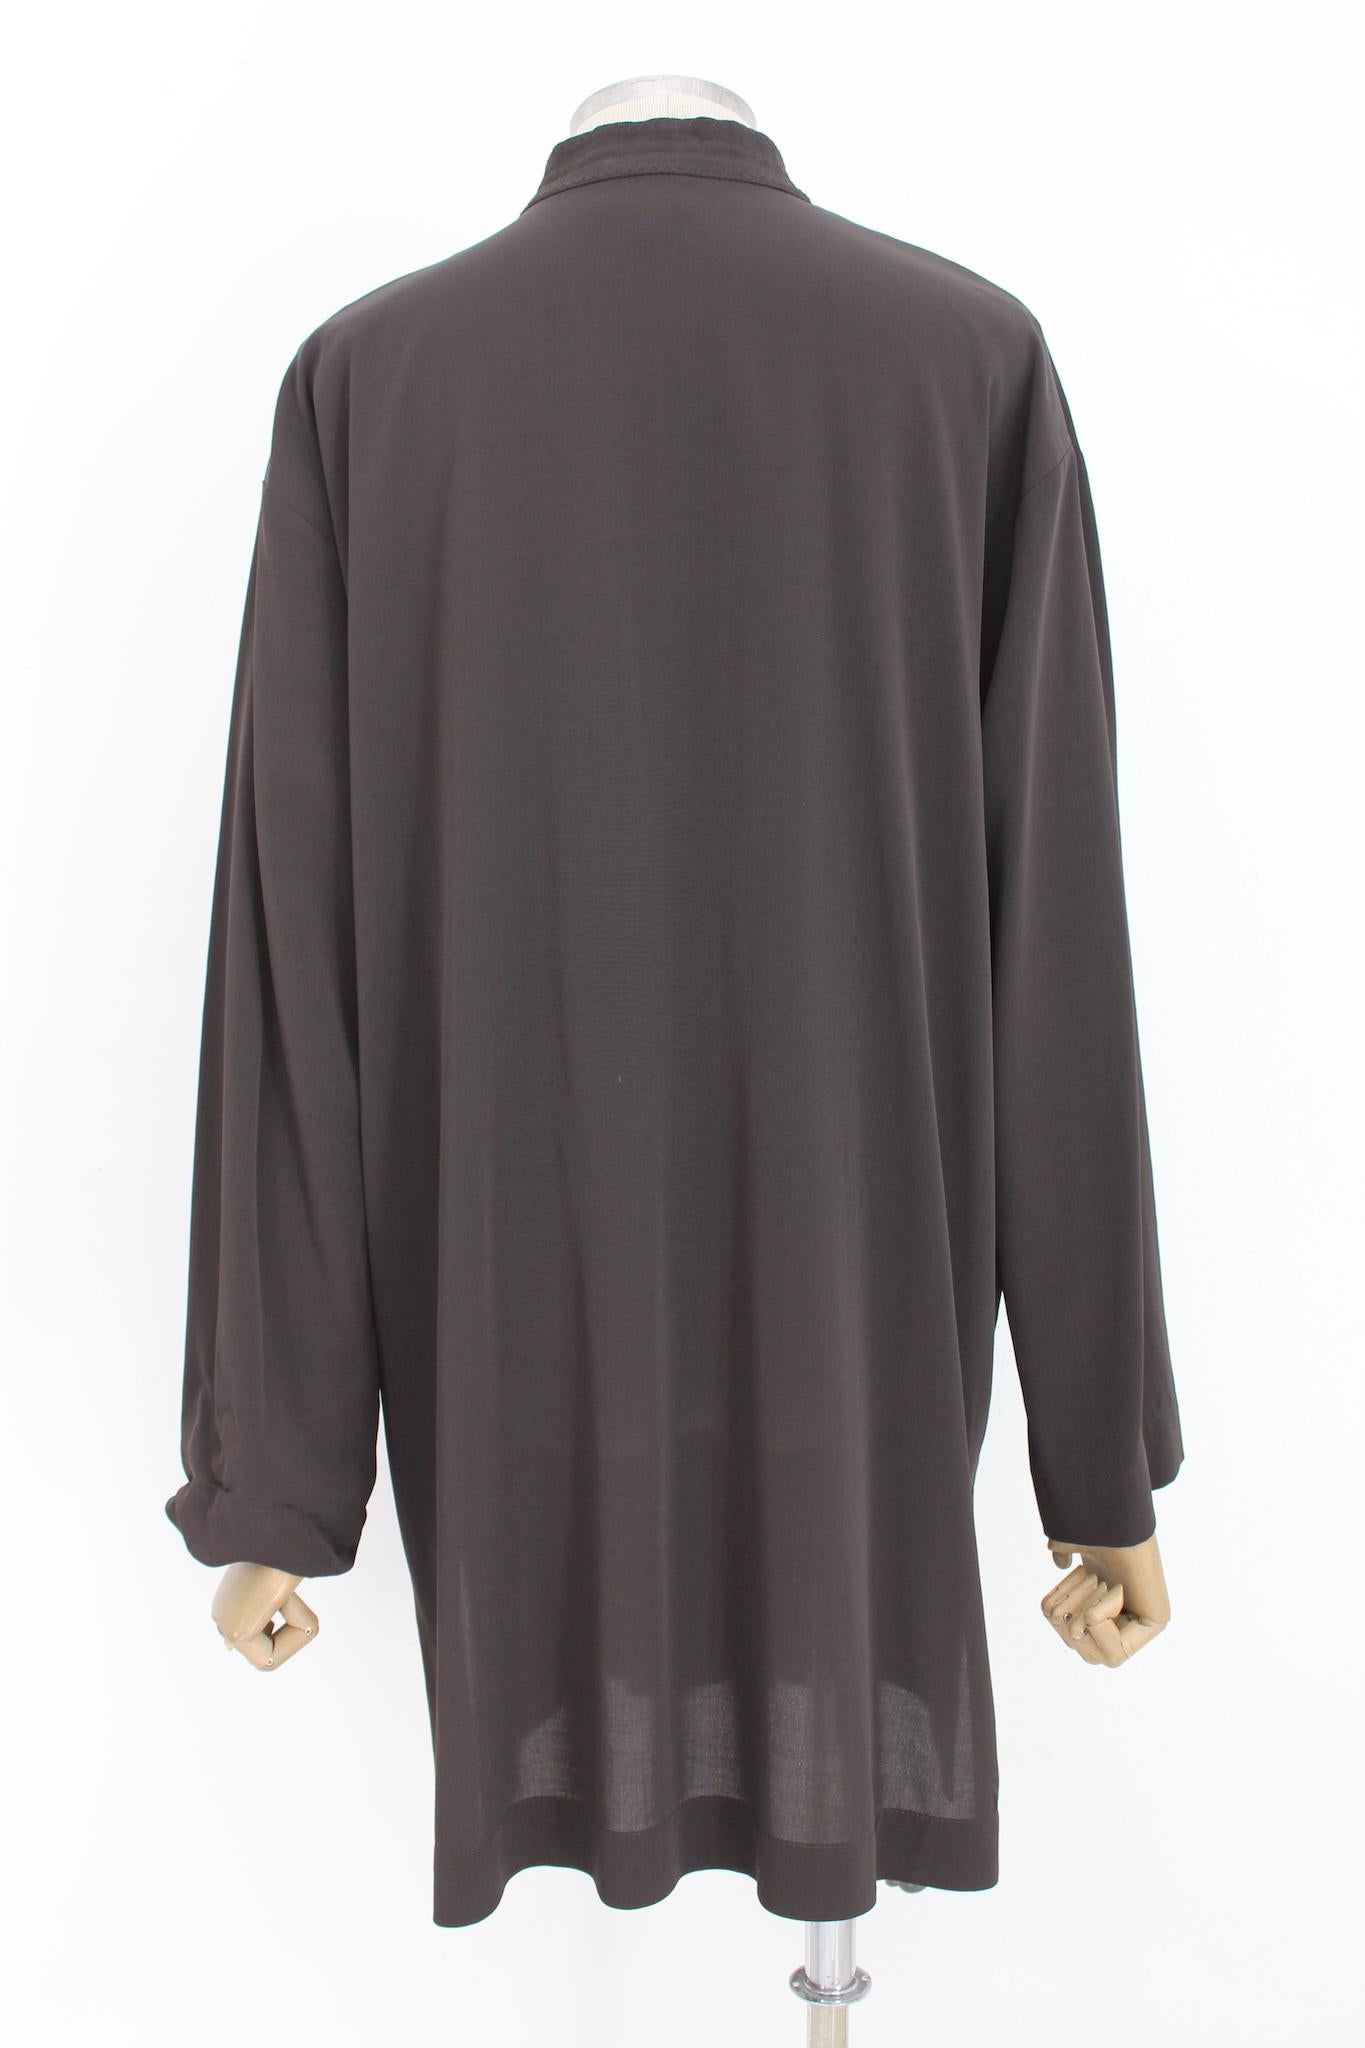 Long oversized shirt dress by Dries Van Noten. Dark brown color, button closure, 62% rayon, 38% wool fabric. Made in Belgium.

Size: 42 It 8 Us 10 Uk

Shoulder: 50 cm
Bust / Chest: 60 cm
Sleeve: 60 cm
Length: 92 cm